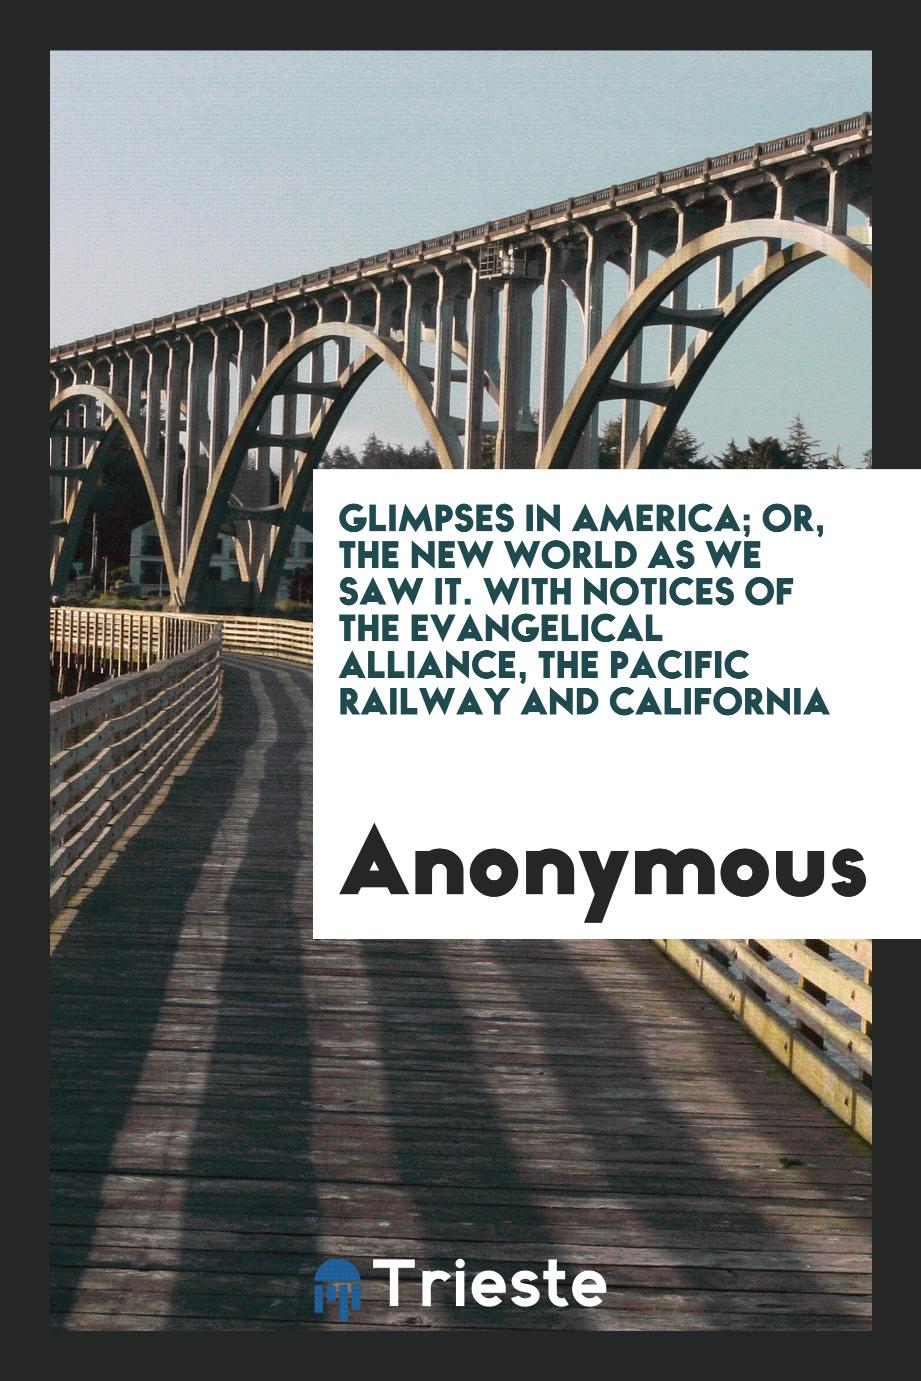 Glimpses in America; or, The new world as we saw it. With notices of the Evangelical Alliance, the Pacific Railway and California